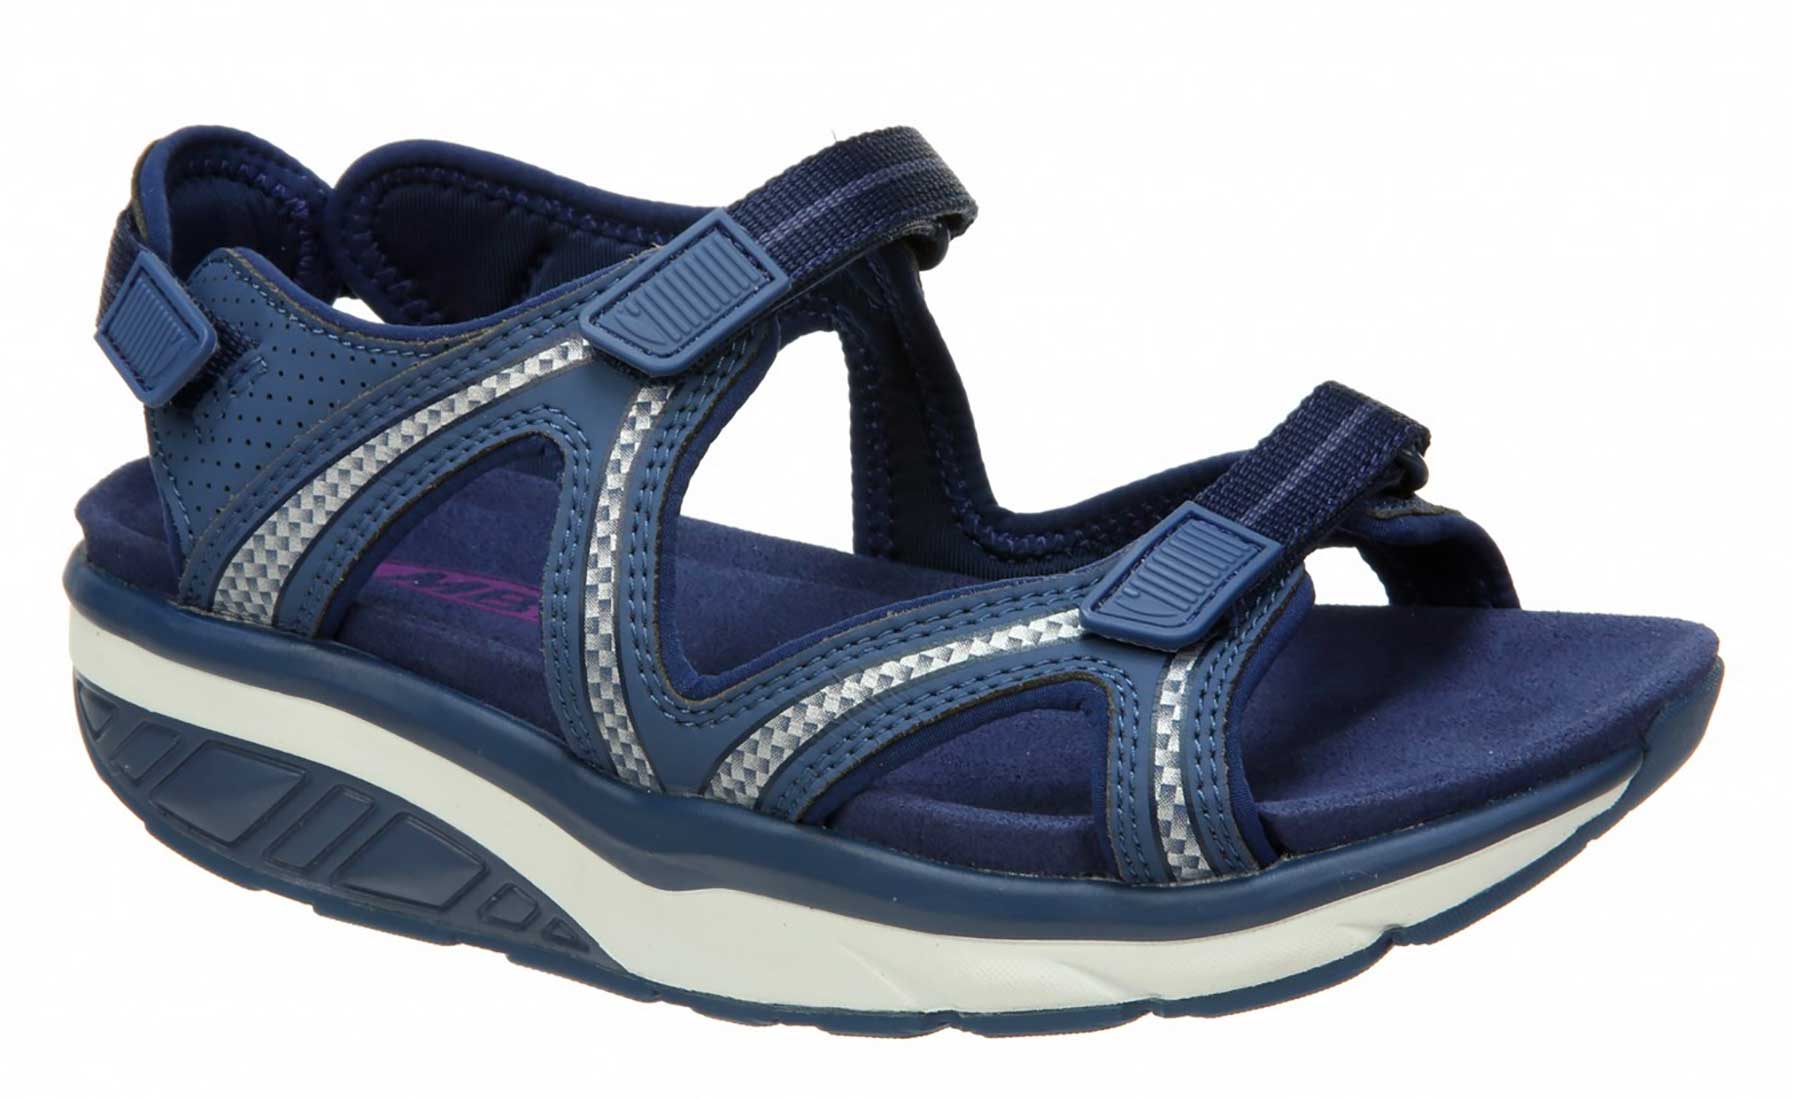 MBT Shoes Women's Lila 6 Sport - 700667 - Moderate, Casual, Therapeutic,  and Comfort Shoe